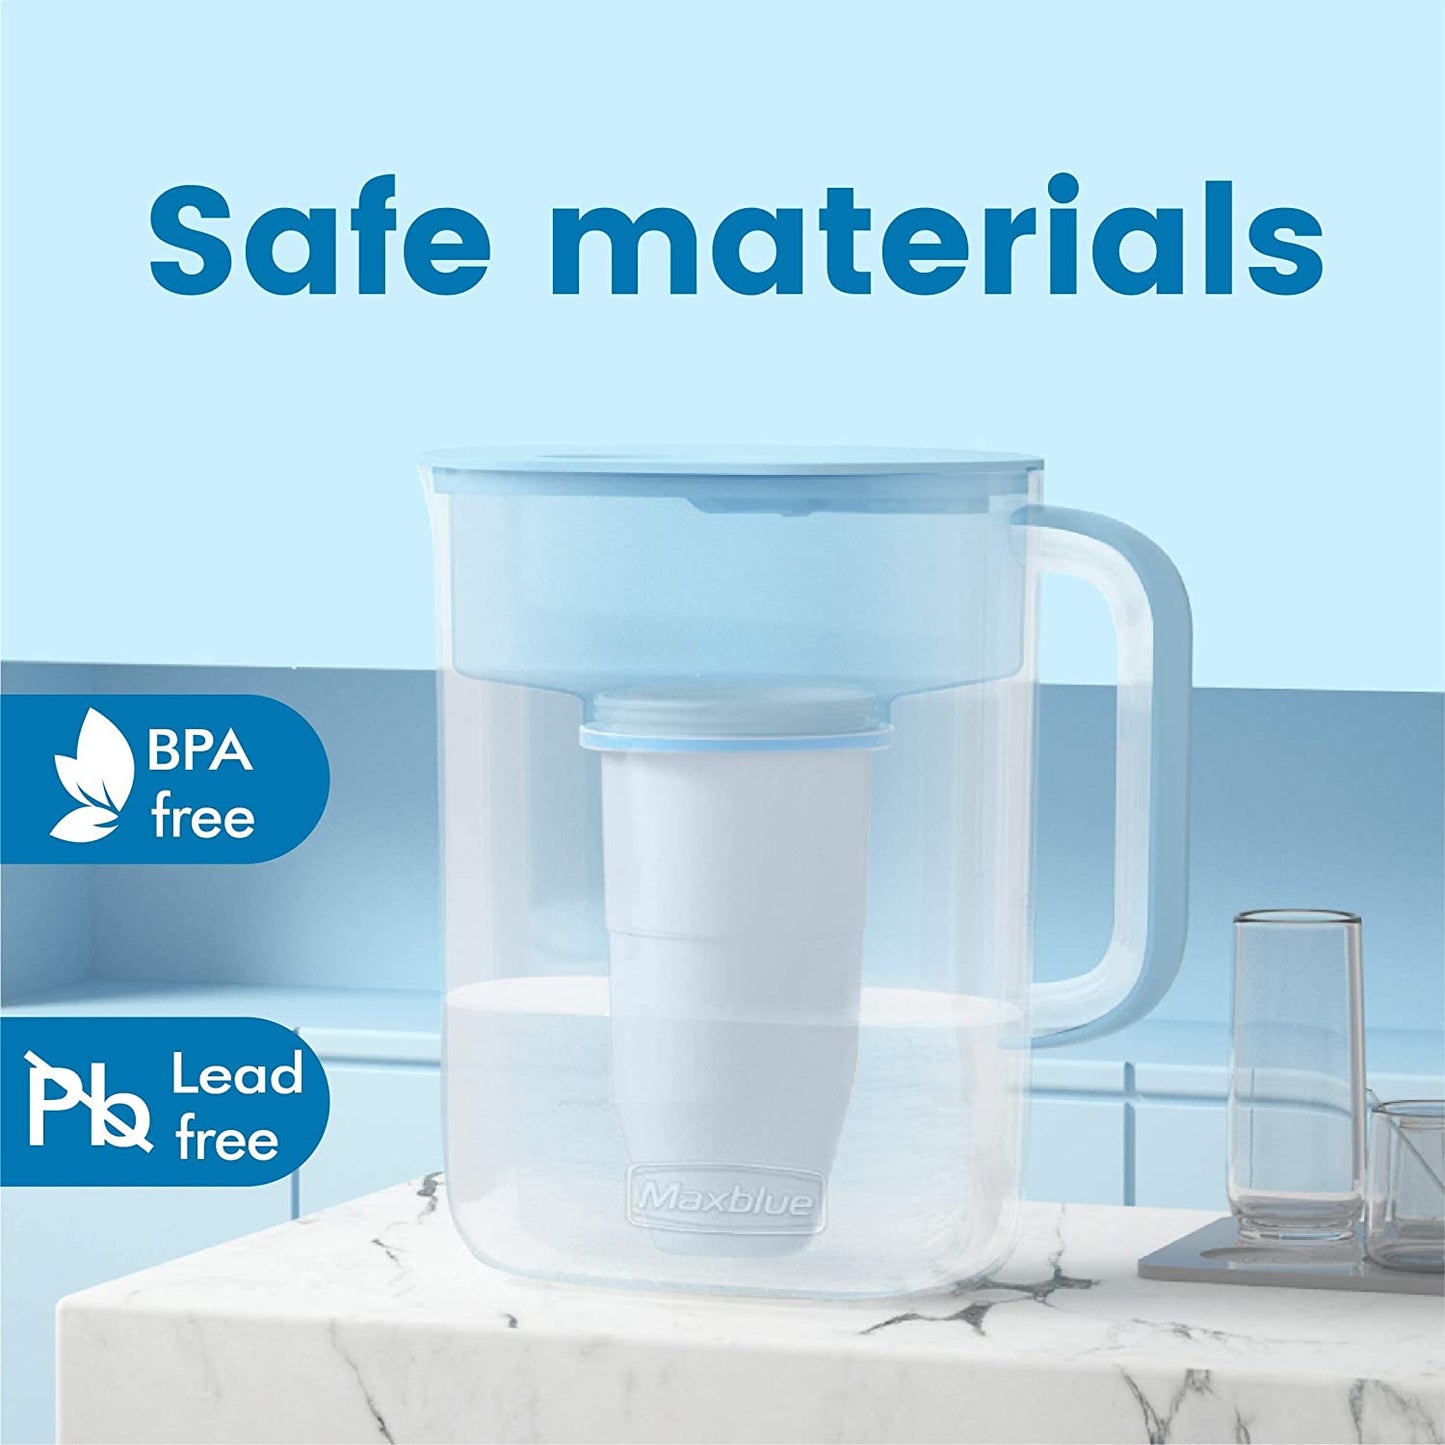 Maxblue 10-Cup Water Filter Pitcher with 1 Filter, TDS Reduction, 5-Stage Filtration System